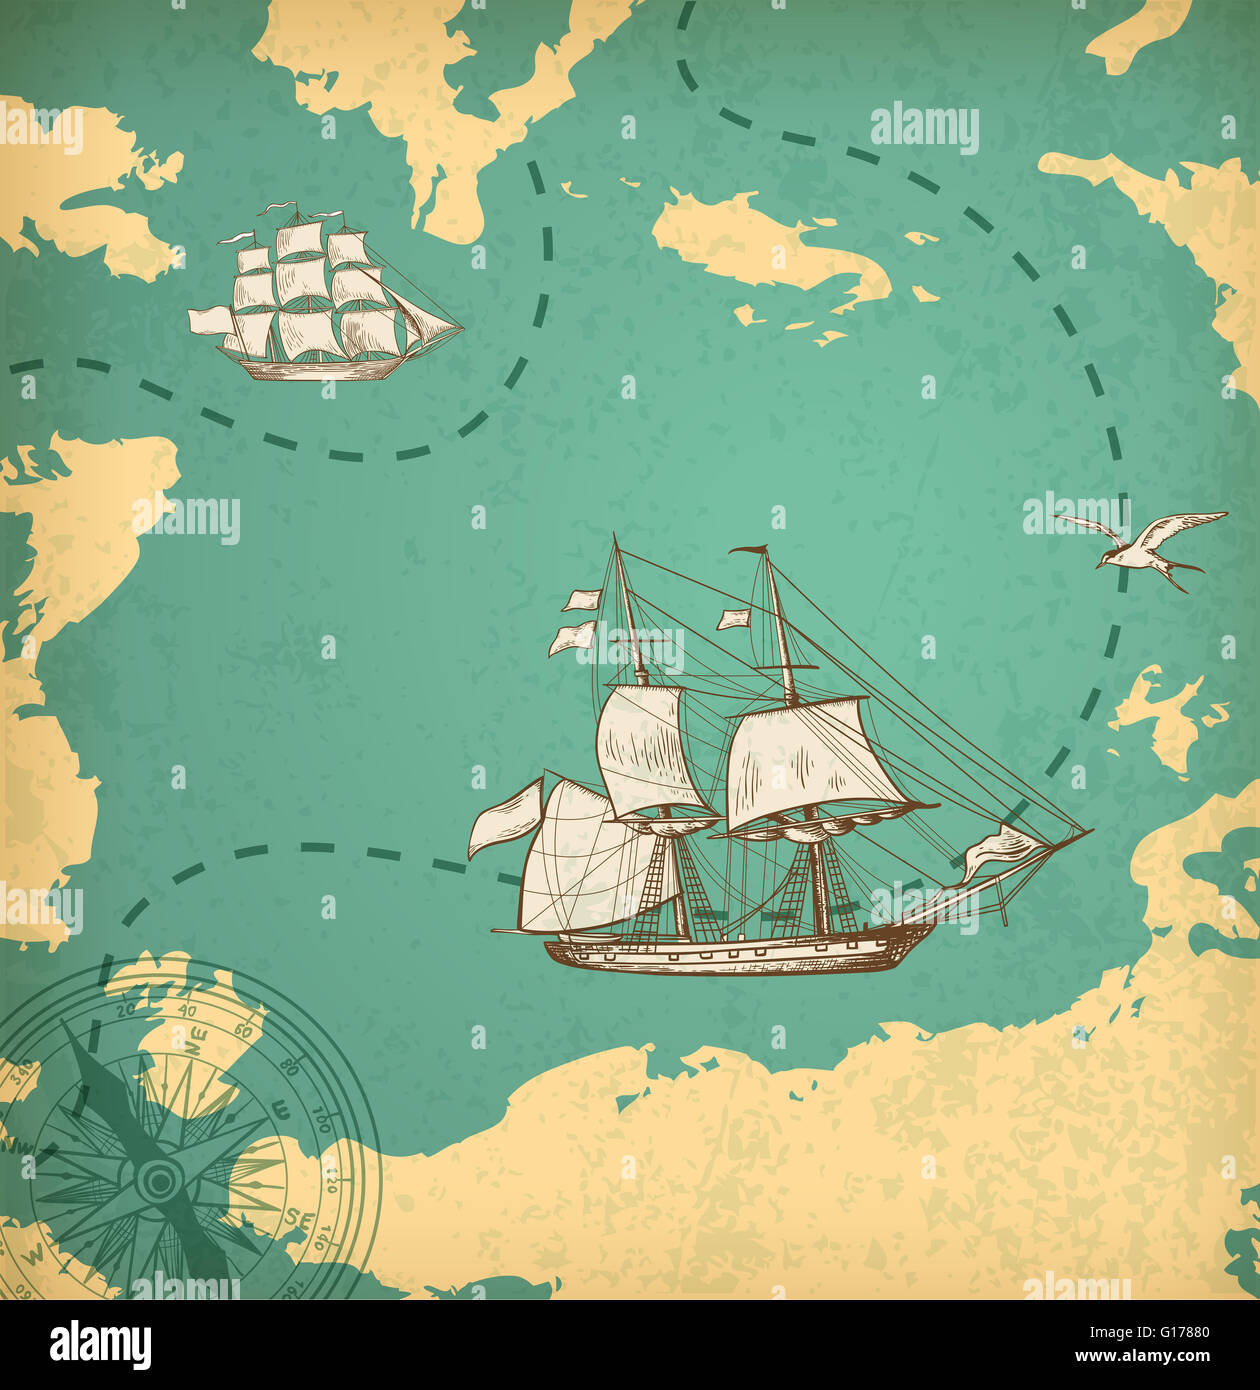 Vintage map with sailing vessels. Ancient map with ships. Stock Photo